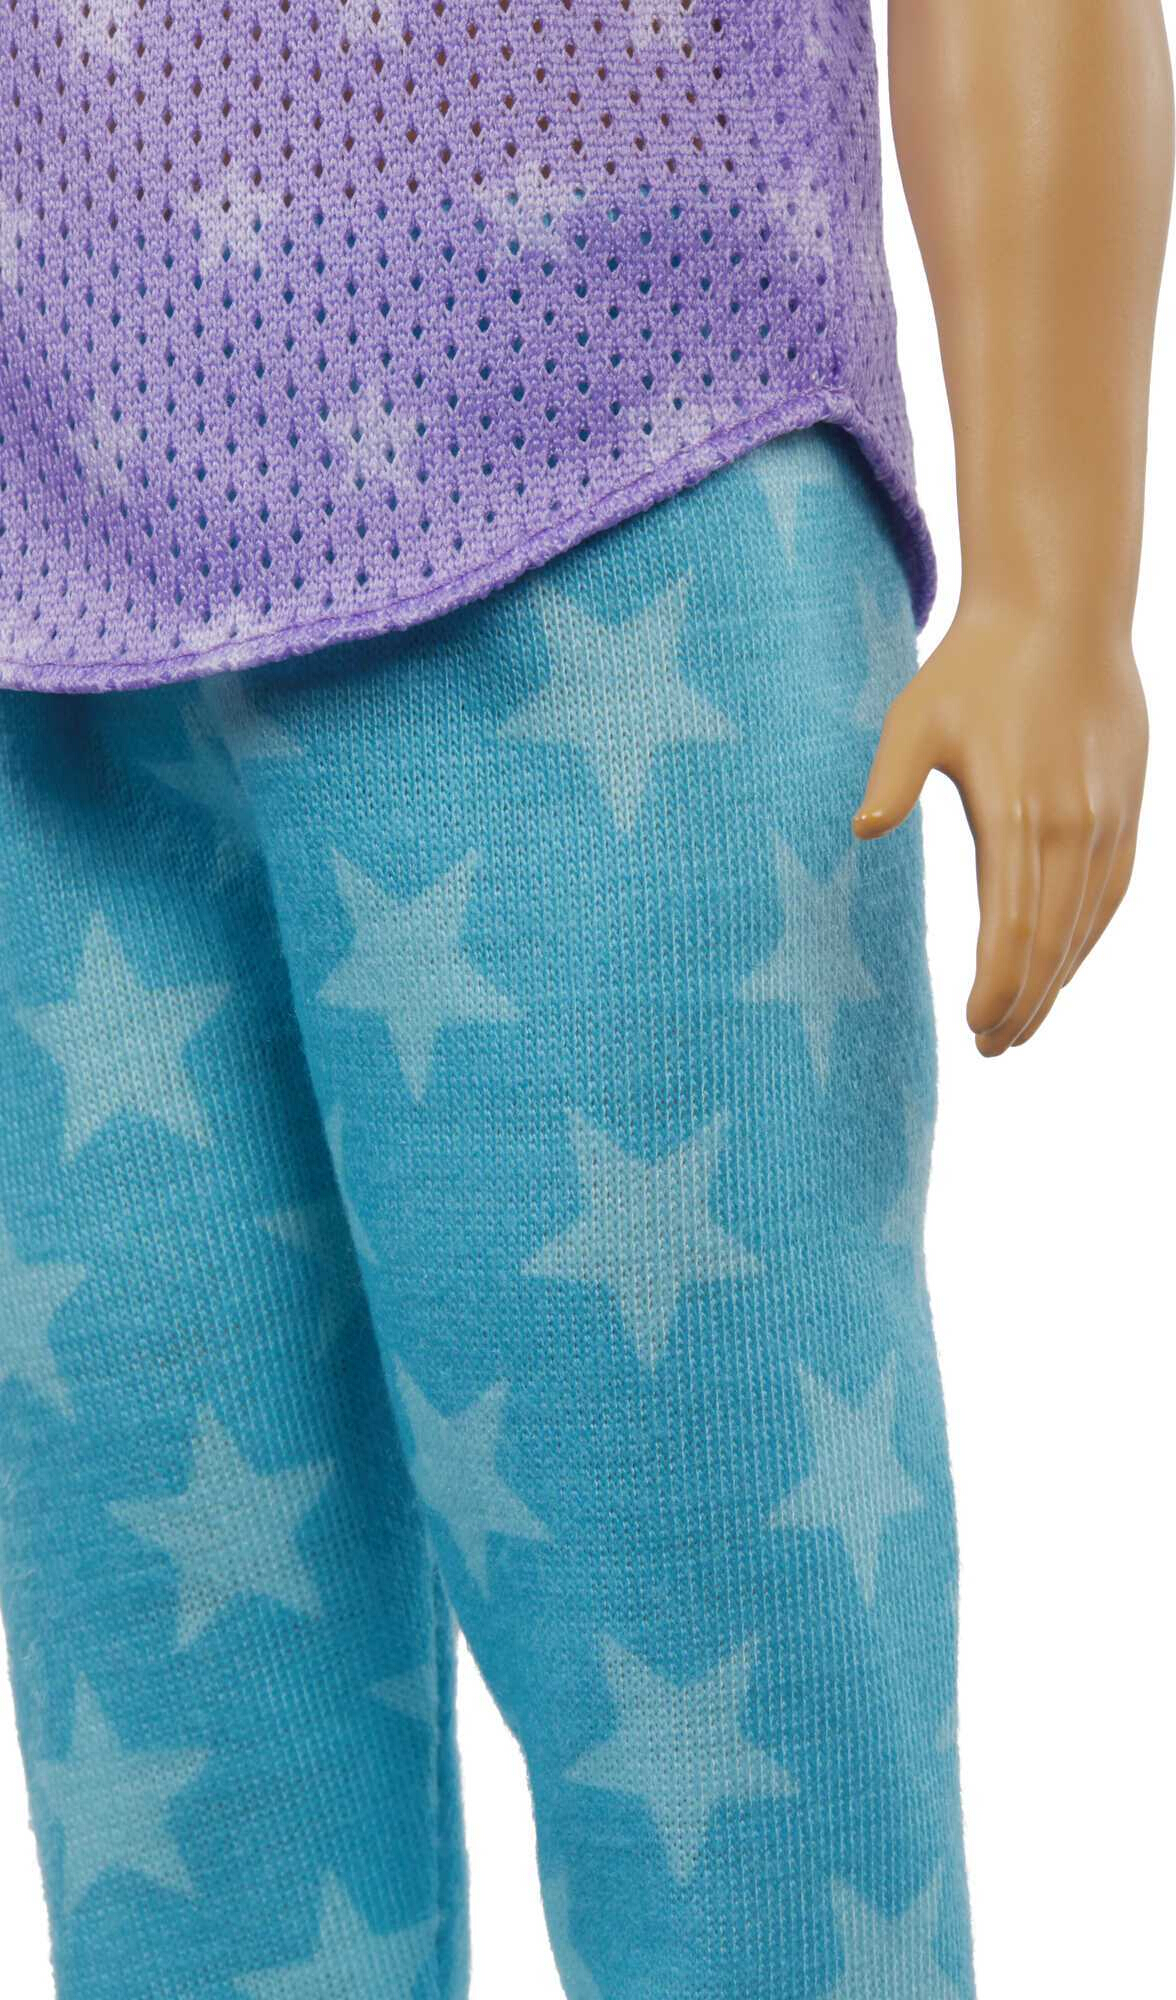 Barbie Ken Fashionistas Doll #165 with Sculpted Brown Hair & Athleisure-wear - image 4 of 7